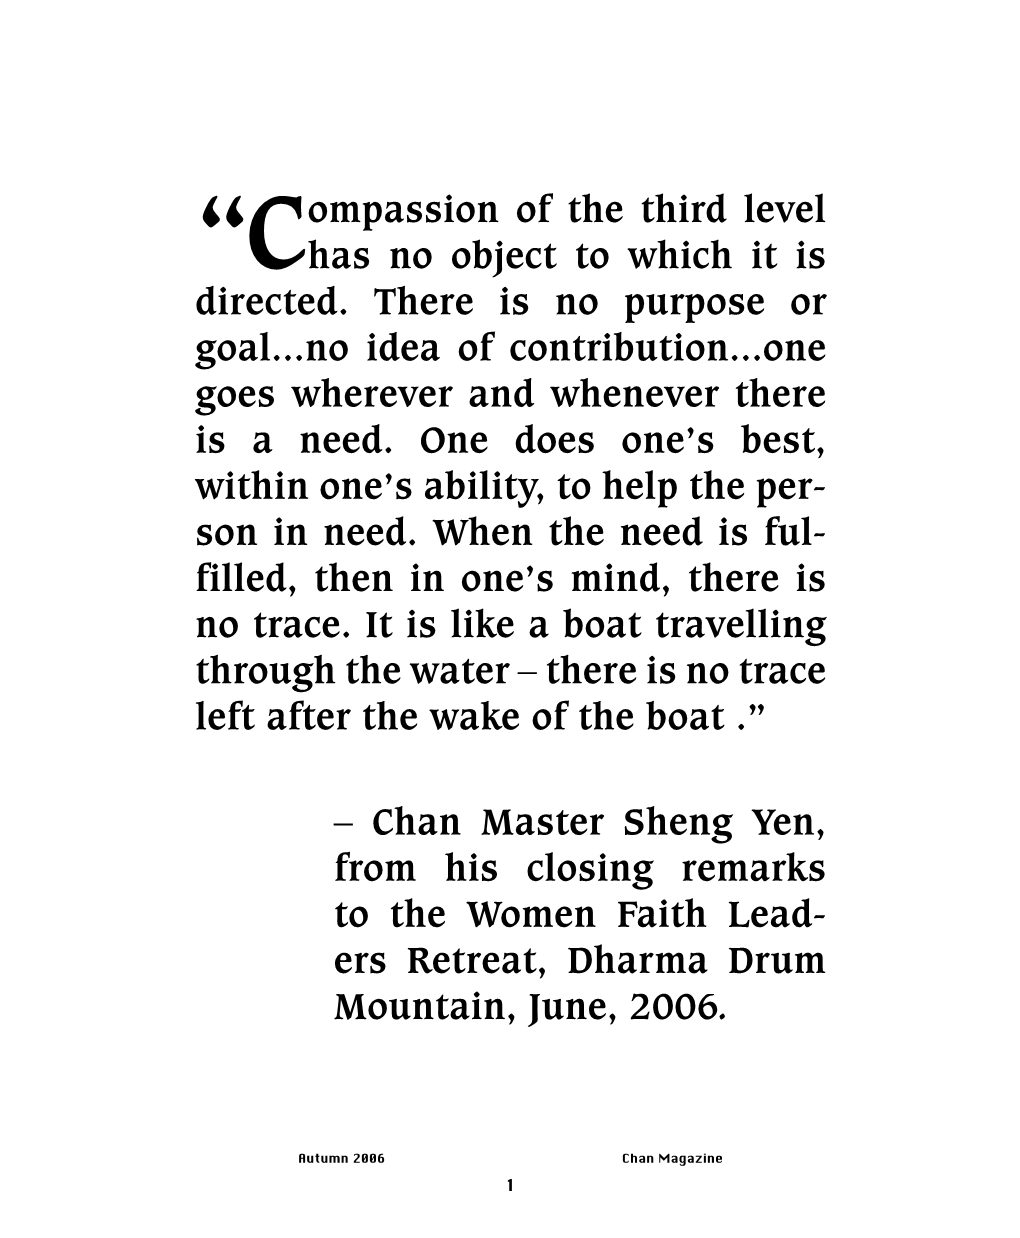 Chan Master Sheng Yen, from His Closing Remarks to the Women Faith Lead- Ers Retreat, Dharma Drum Mountain, June, 2006